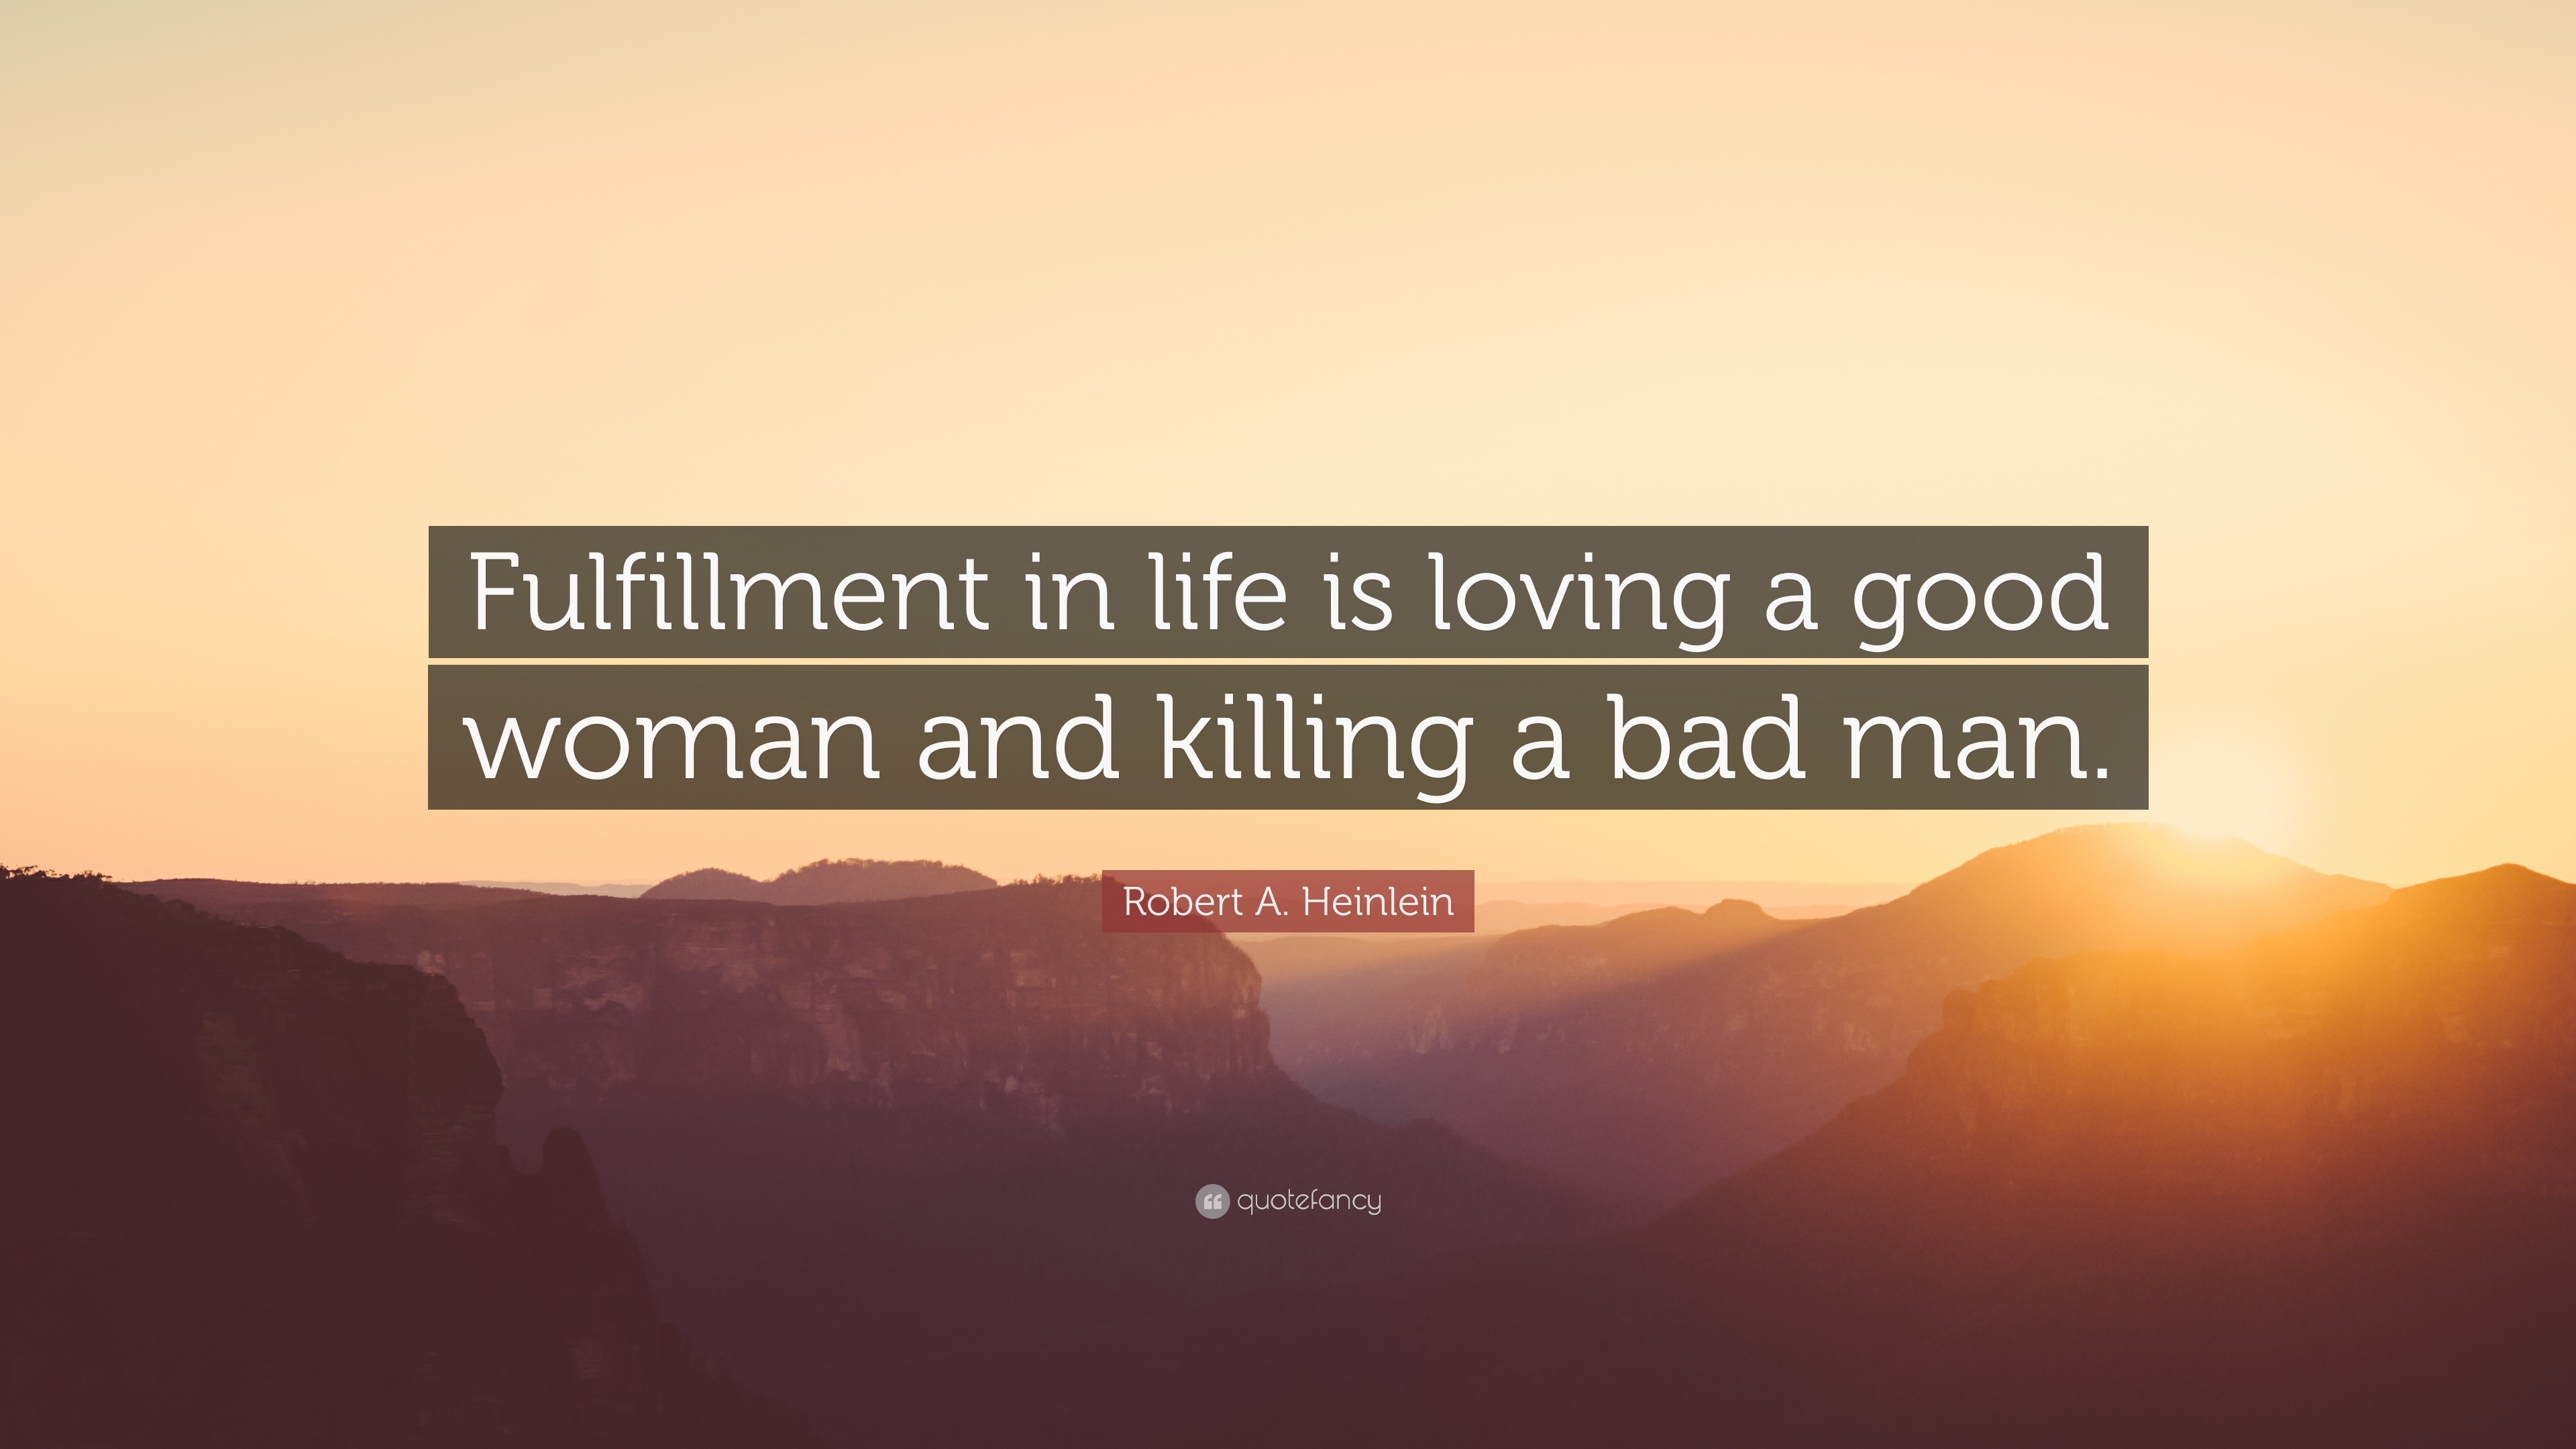 Robert A Heinlein Quote “Fulfillment in life is loving a good woman and